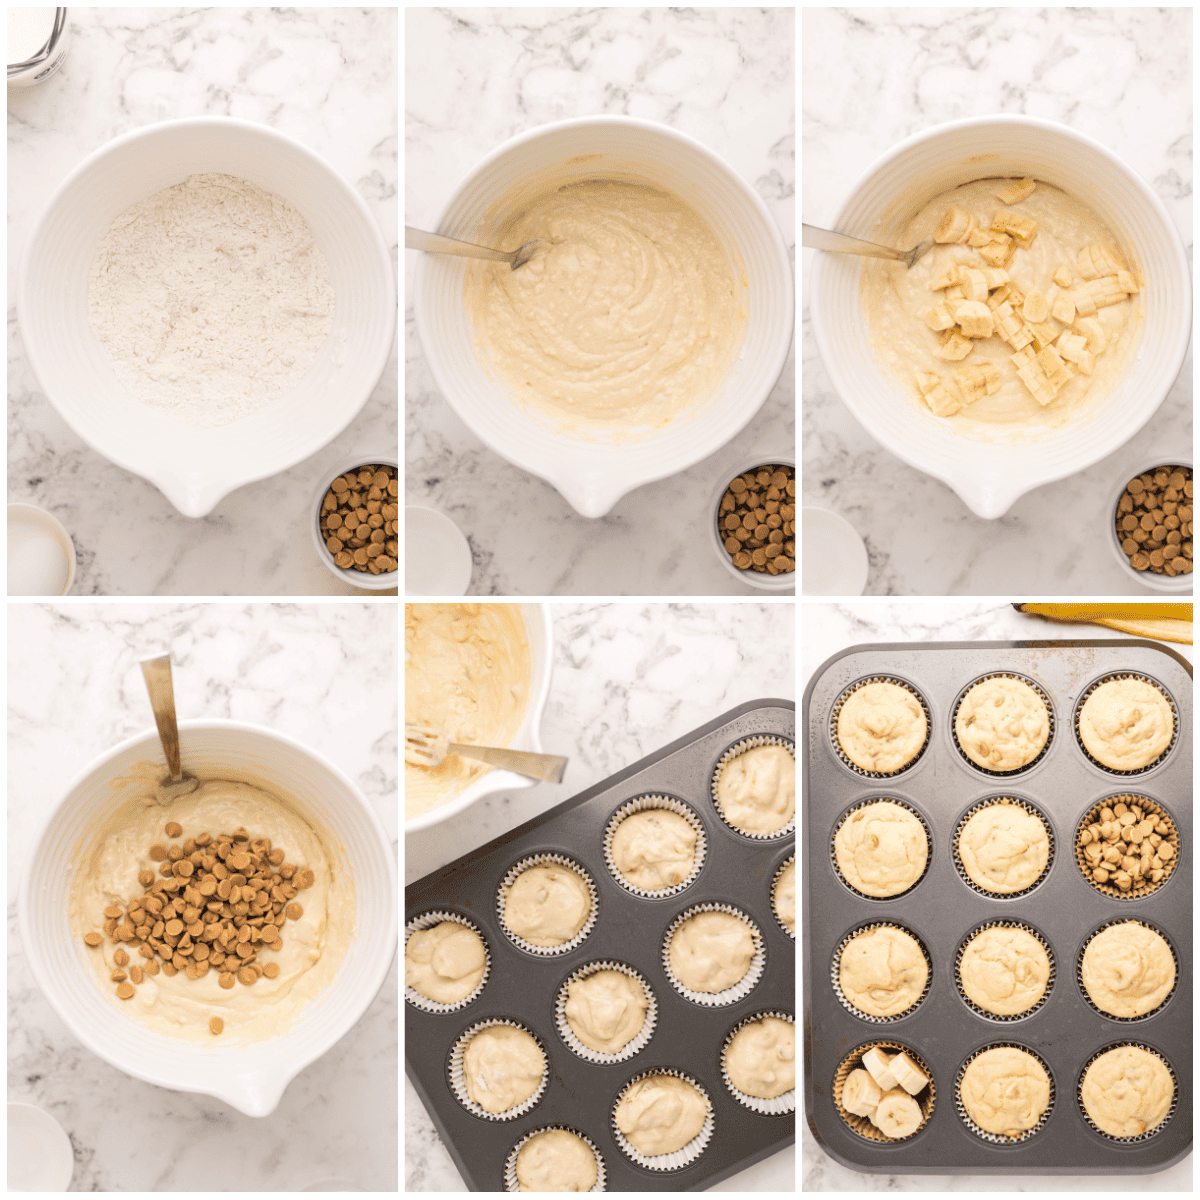 Step by step photos on how to make Pancake Muffins.